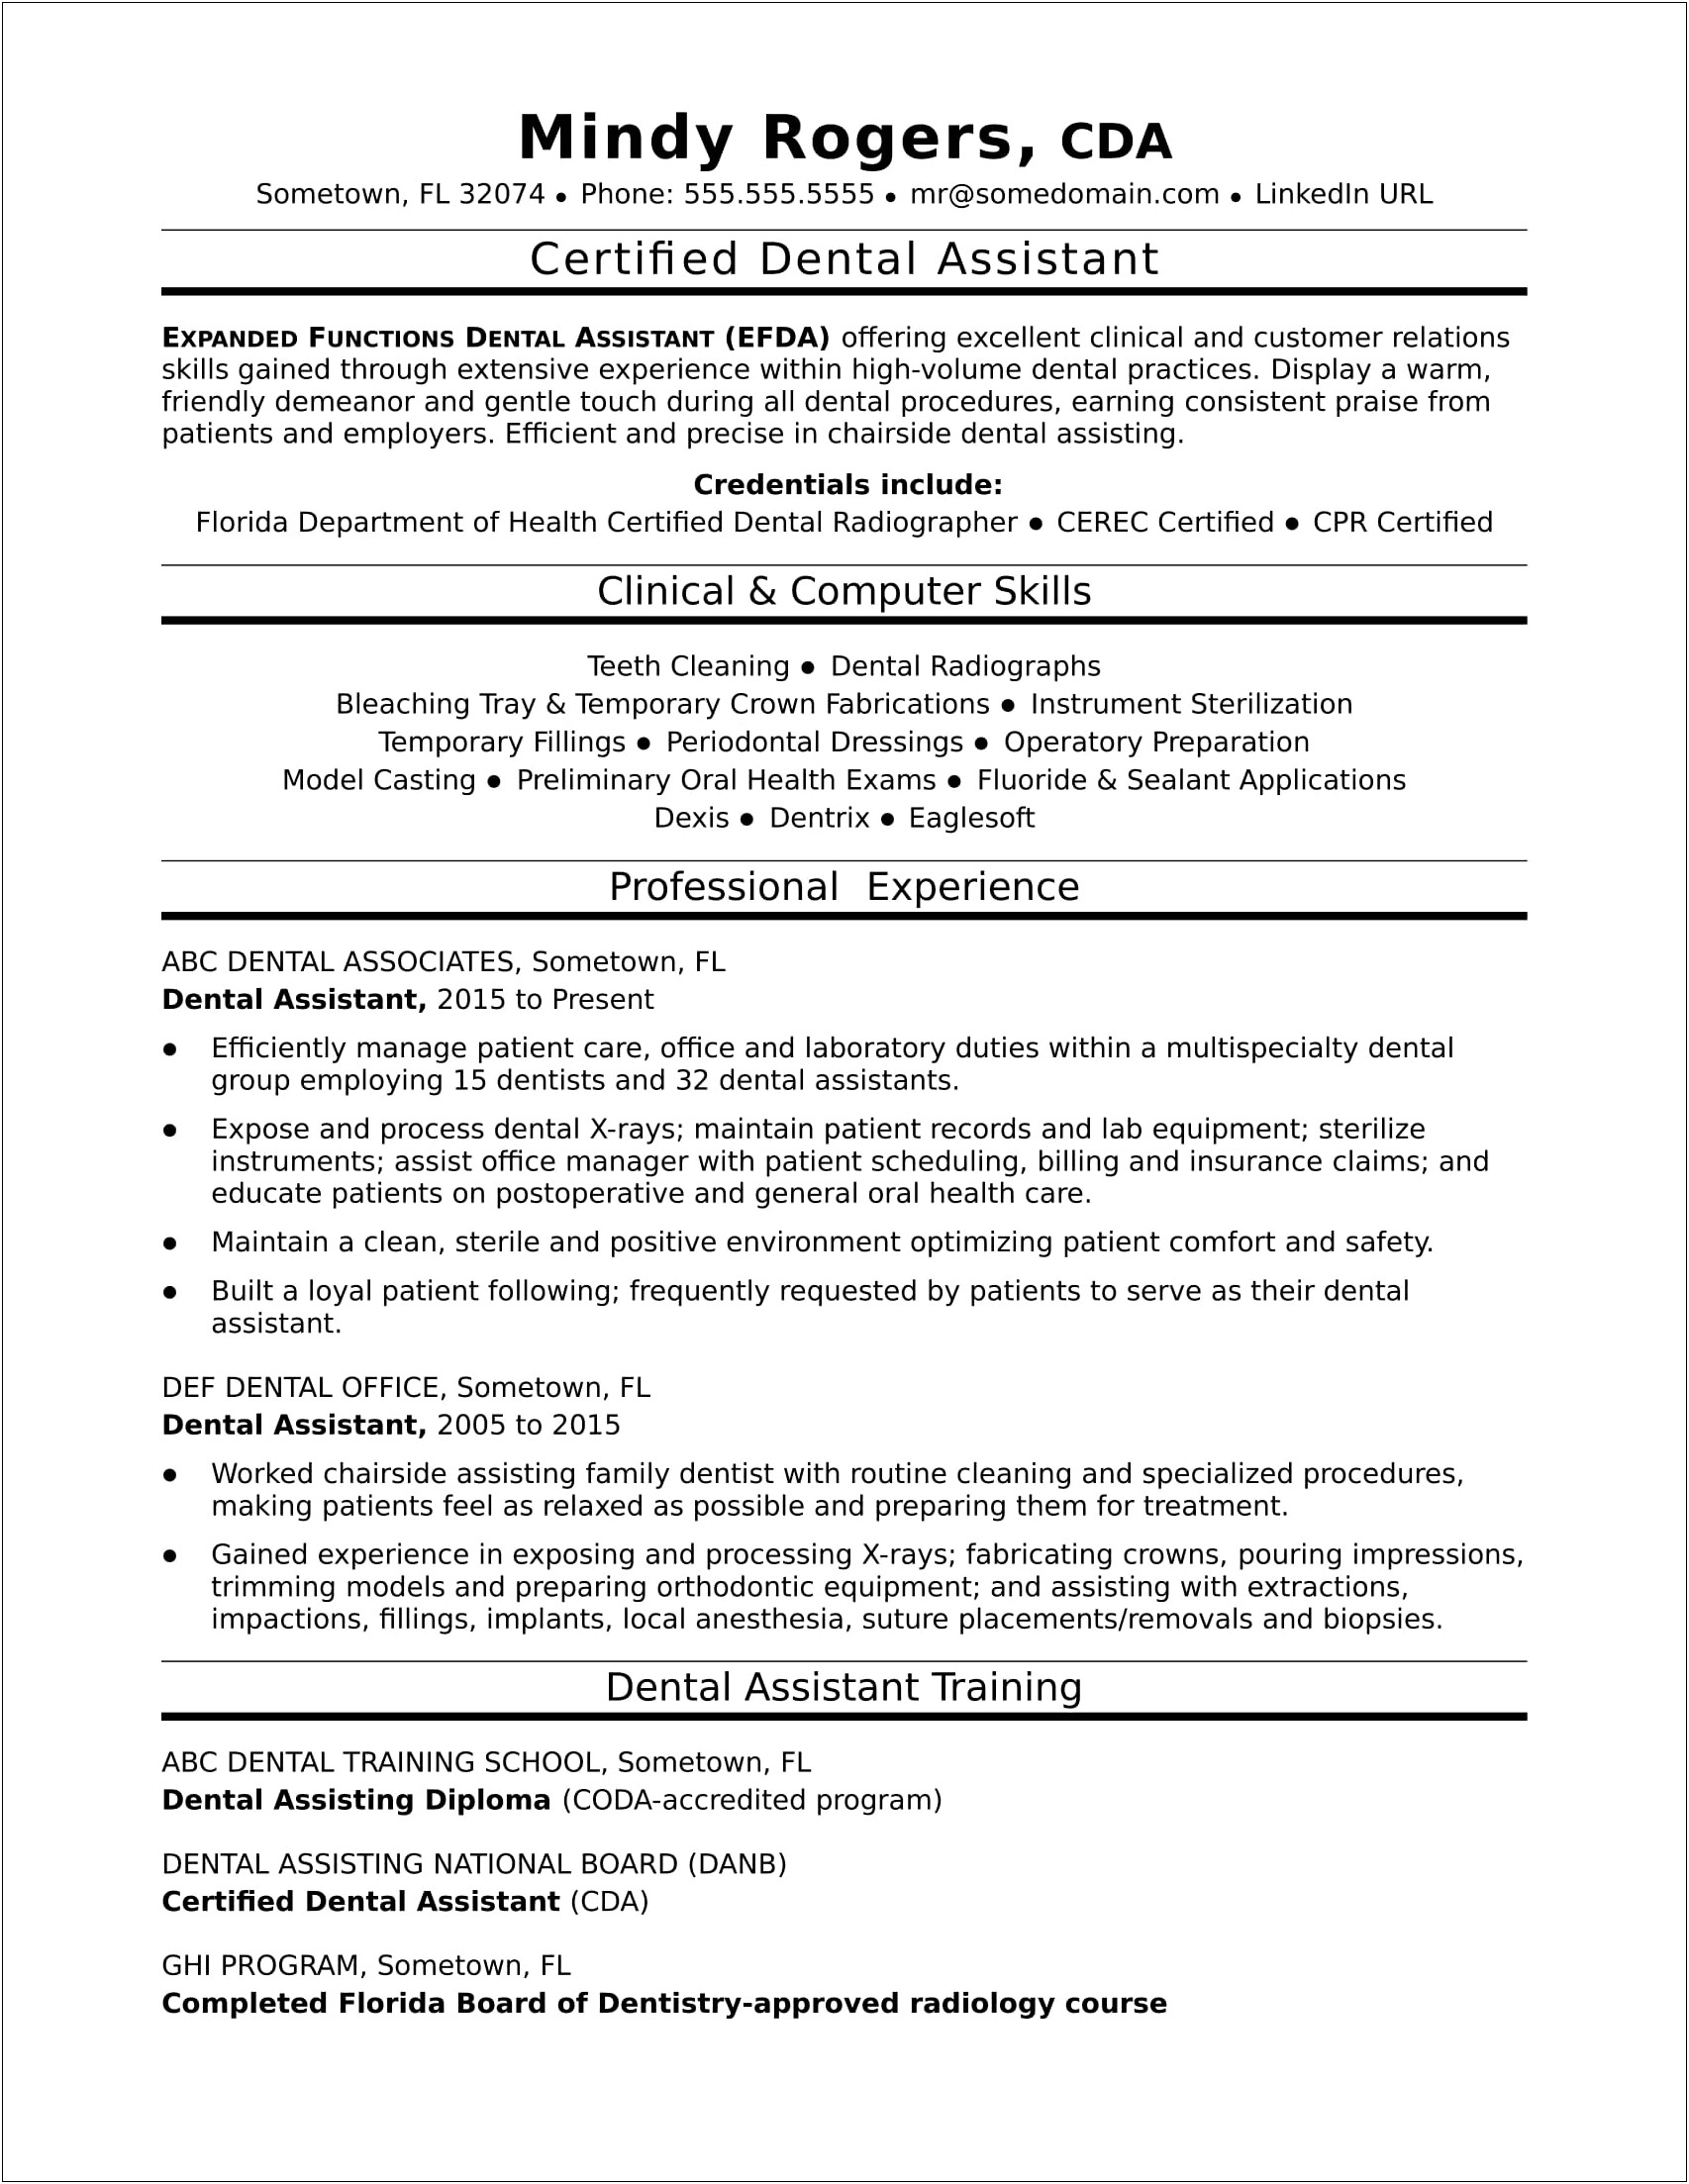 Should Skills Go Before Experience On A Resume